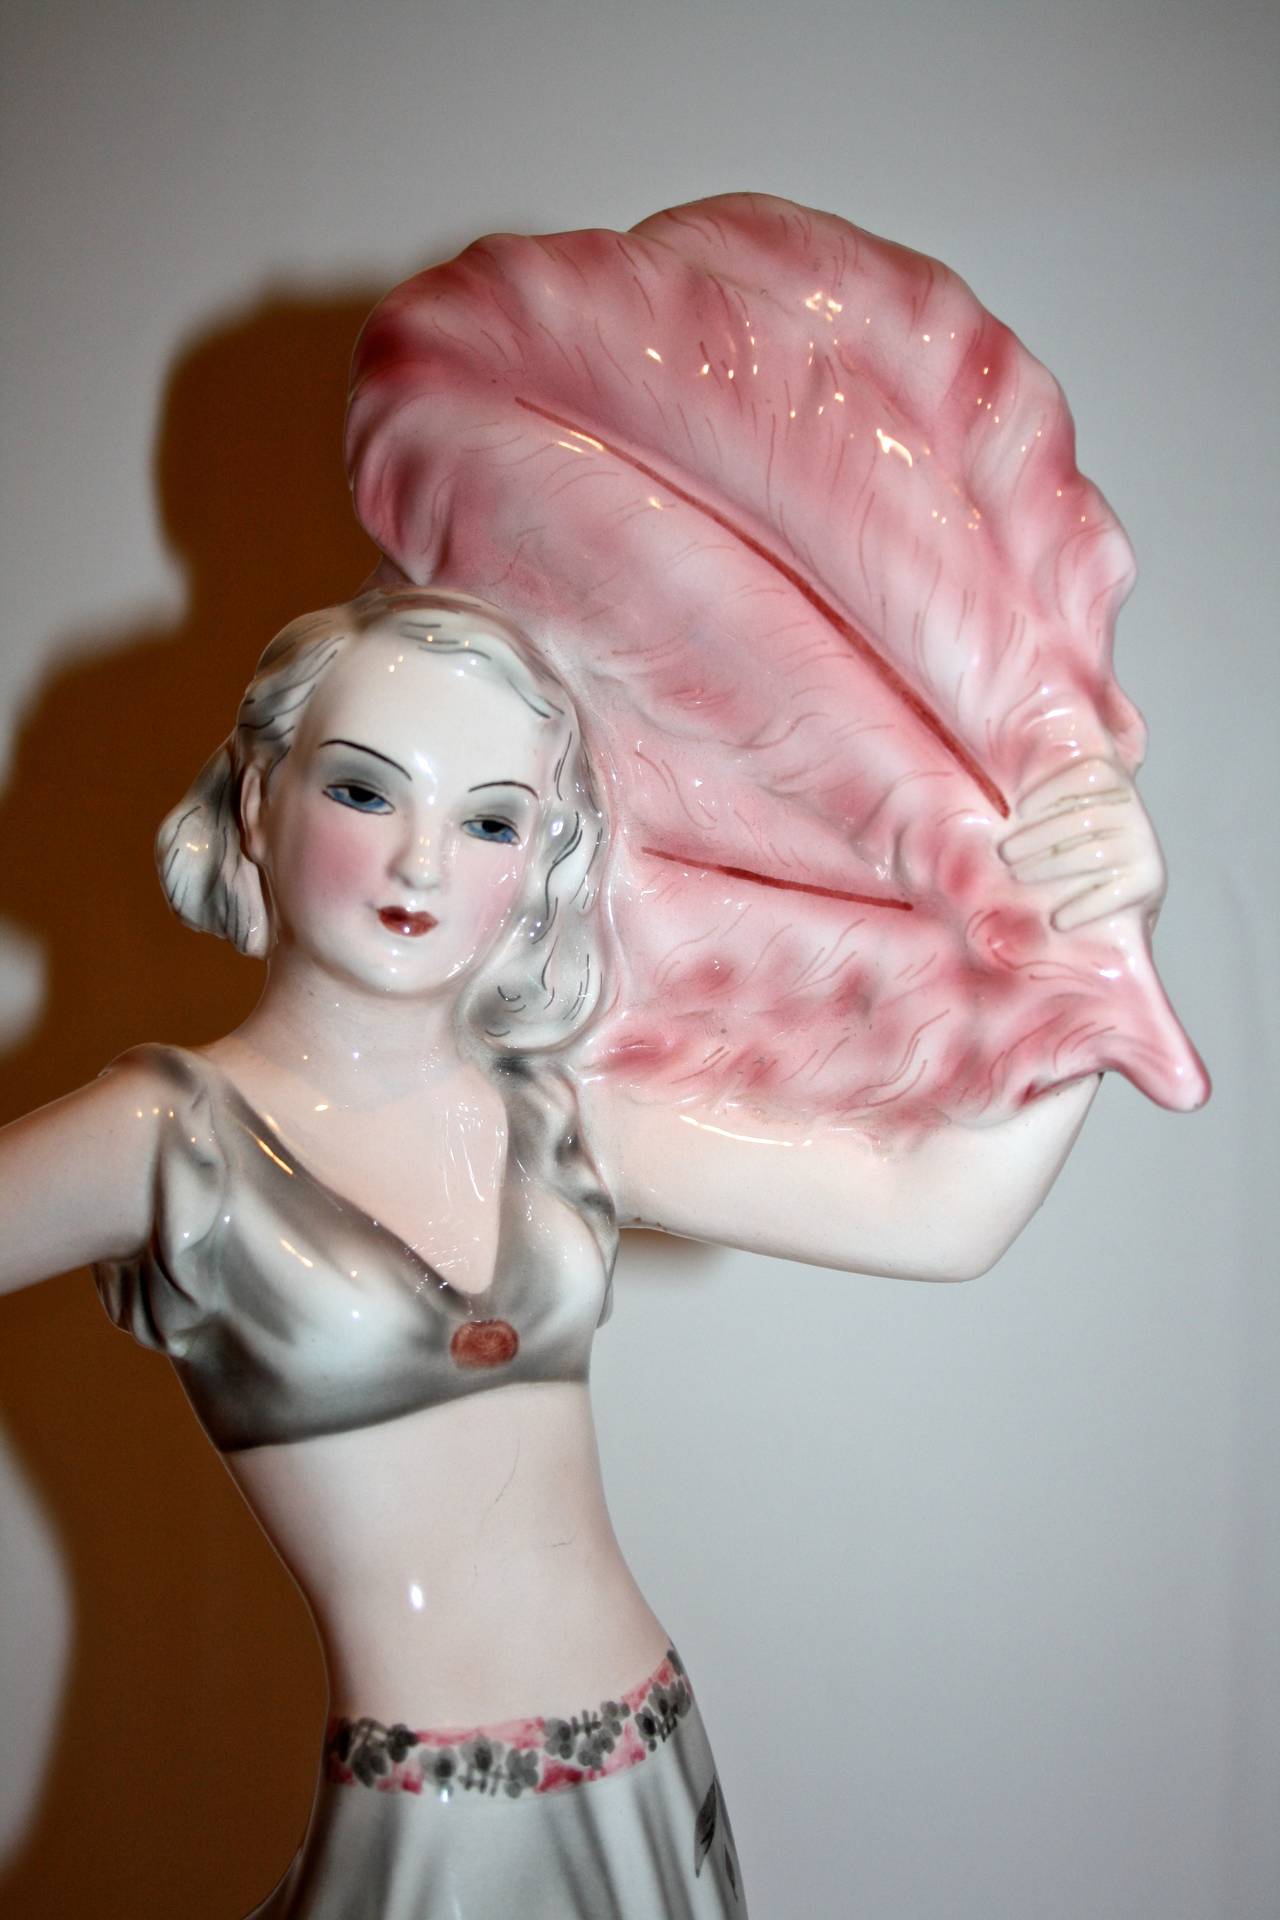 This Rare and Stunning Art Deco figure by Josef Lorenzl for Goldscheider featuring a young showgirl holding a large ostrich feather and holding out her beautiful skirt. The dress has colors of light grey, Charcoal and pink featuring a floral